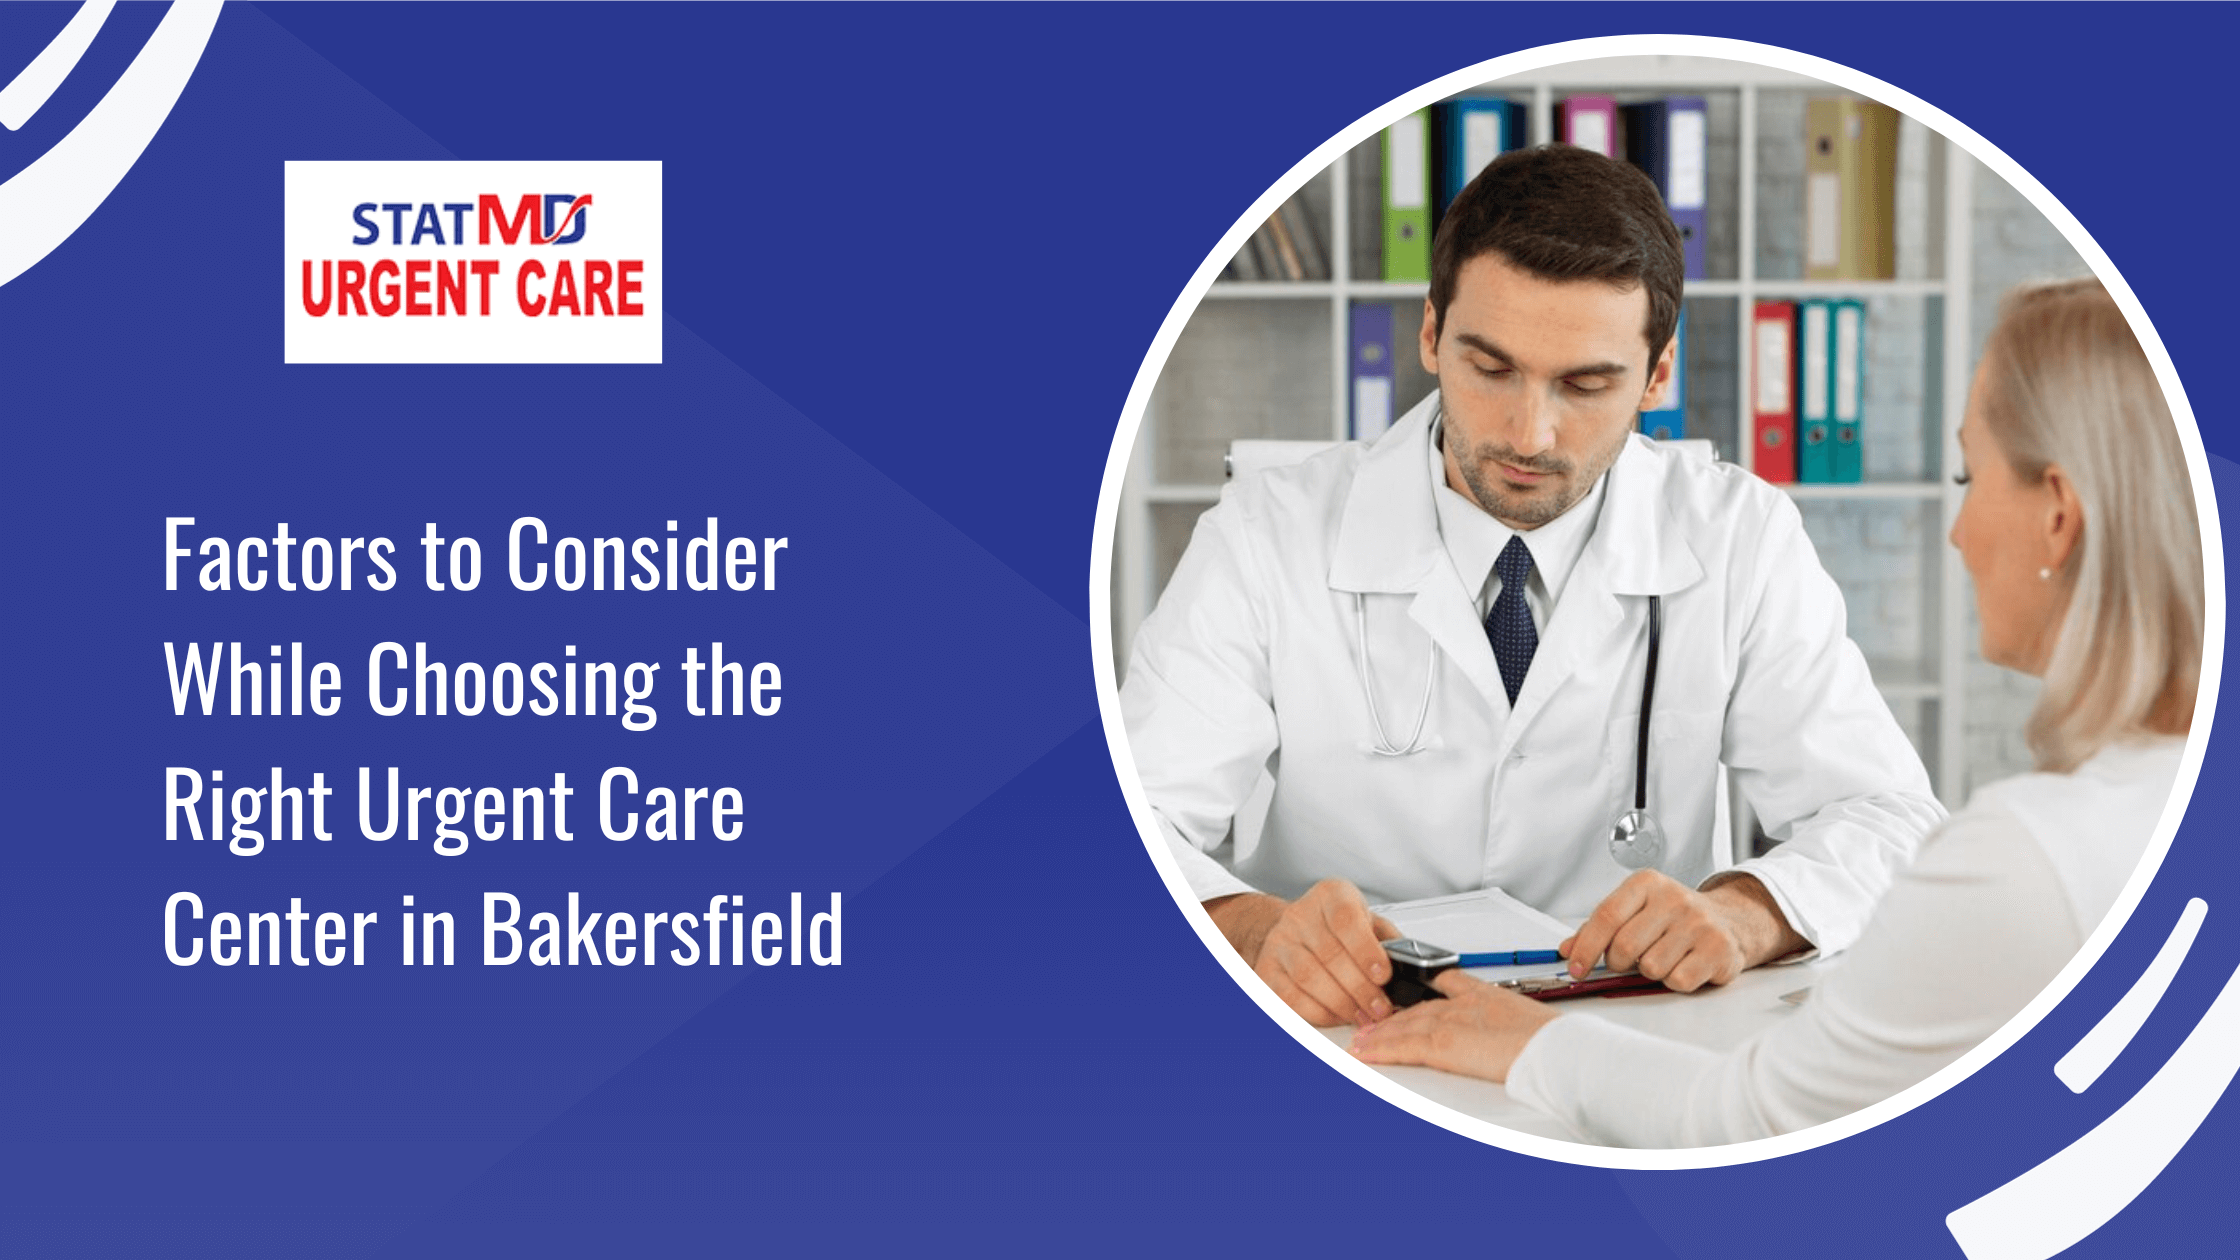 Factors to Consider While Choosing the Right Urgent Care Center in Bakersfield